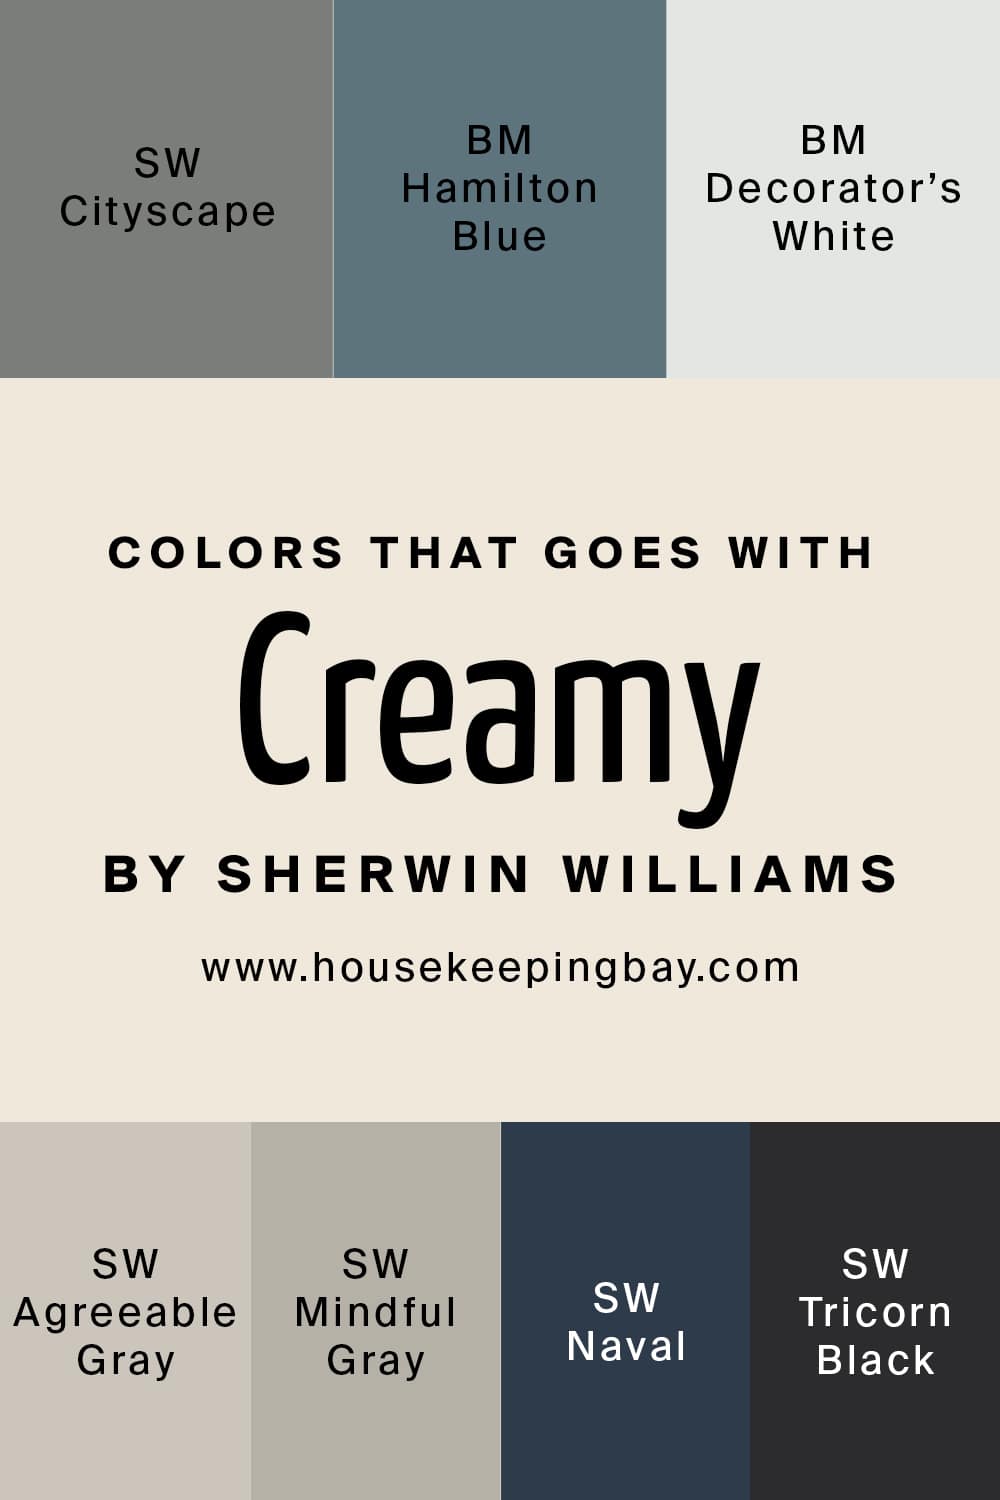 Colors that goes with Cream by Sherwin Williams